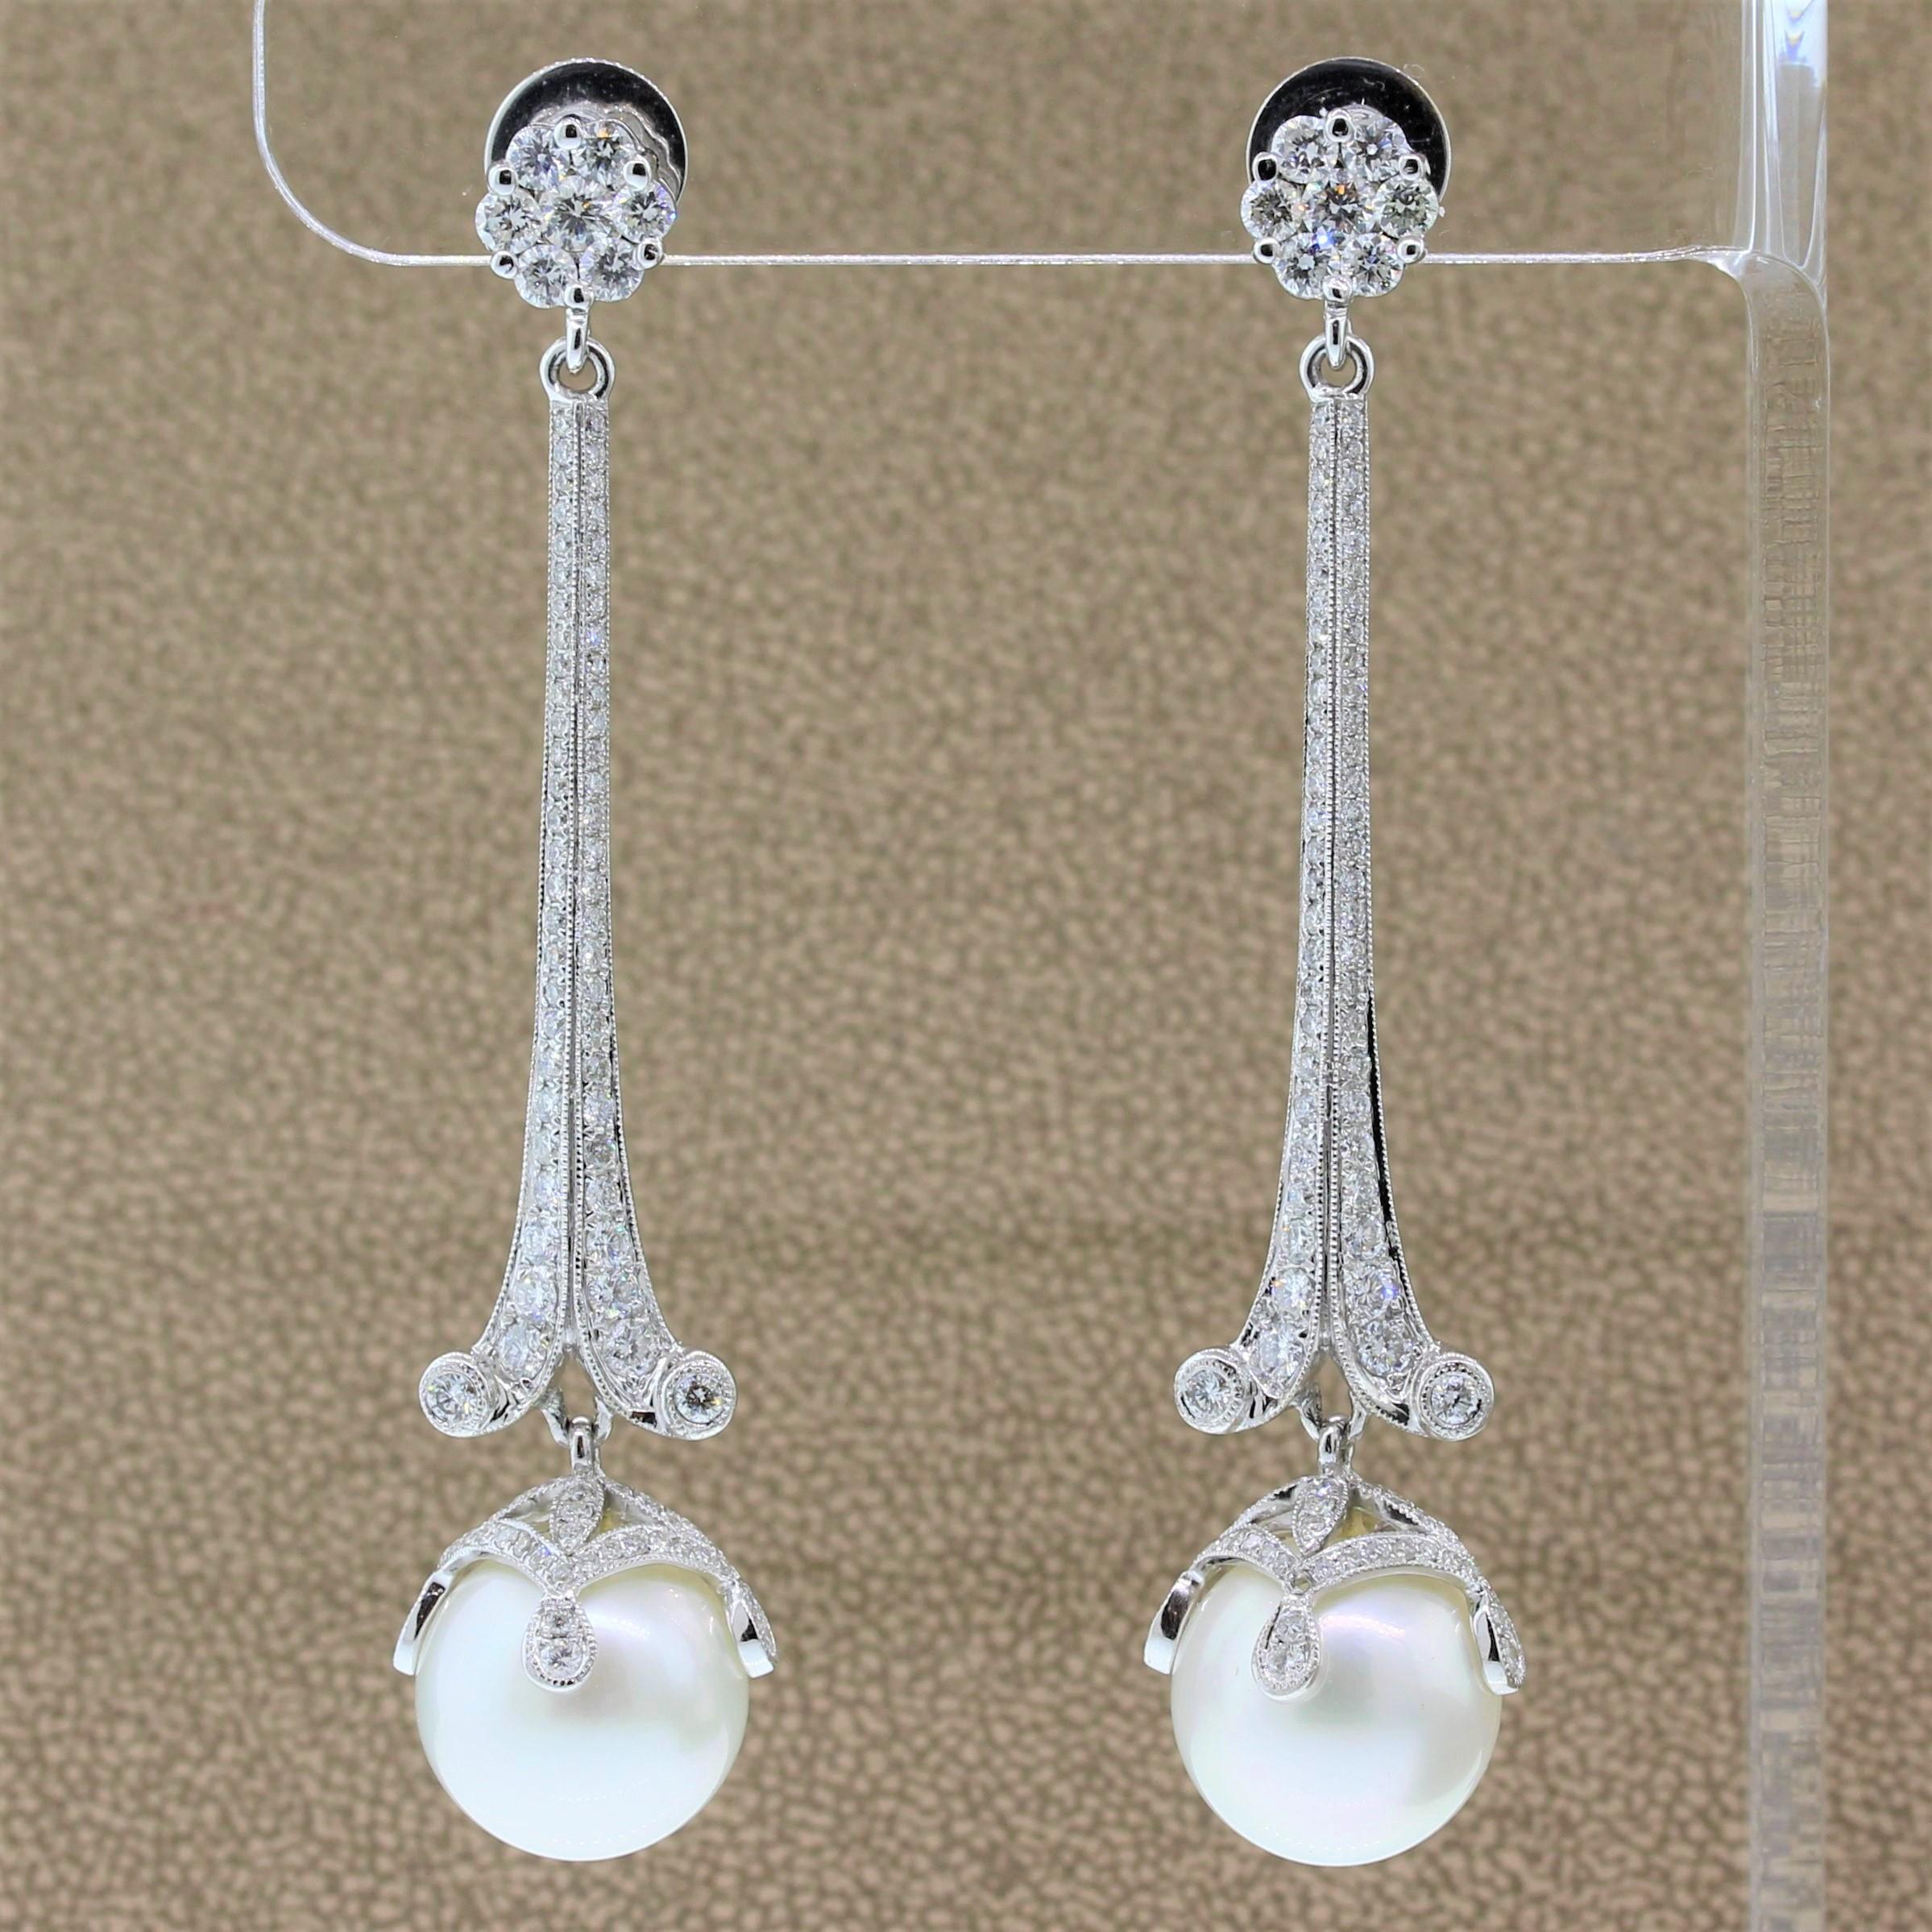 A striking pair of drop earrings featuring lustrous 12.5mm to 13mm South Sea pearls at the end of a long drop. The 18K white gold setting is studded with 2.76 carats of round cut colorless diamonds with a flower cluster at the post backing.